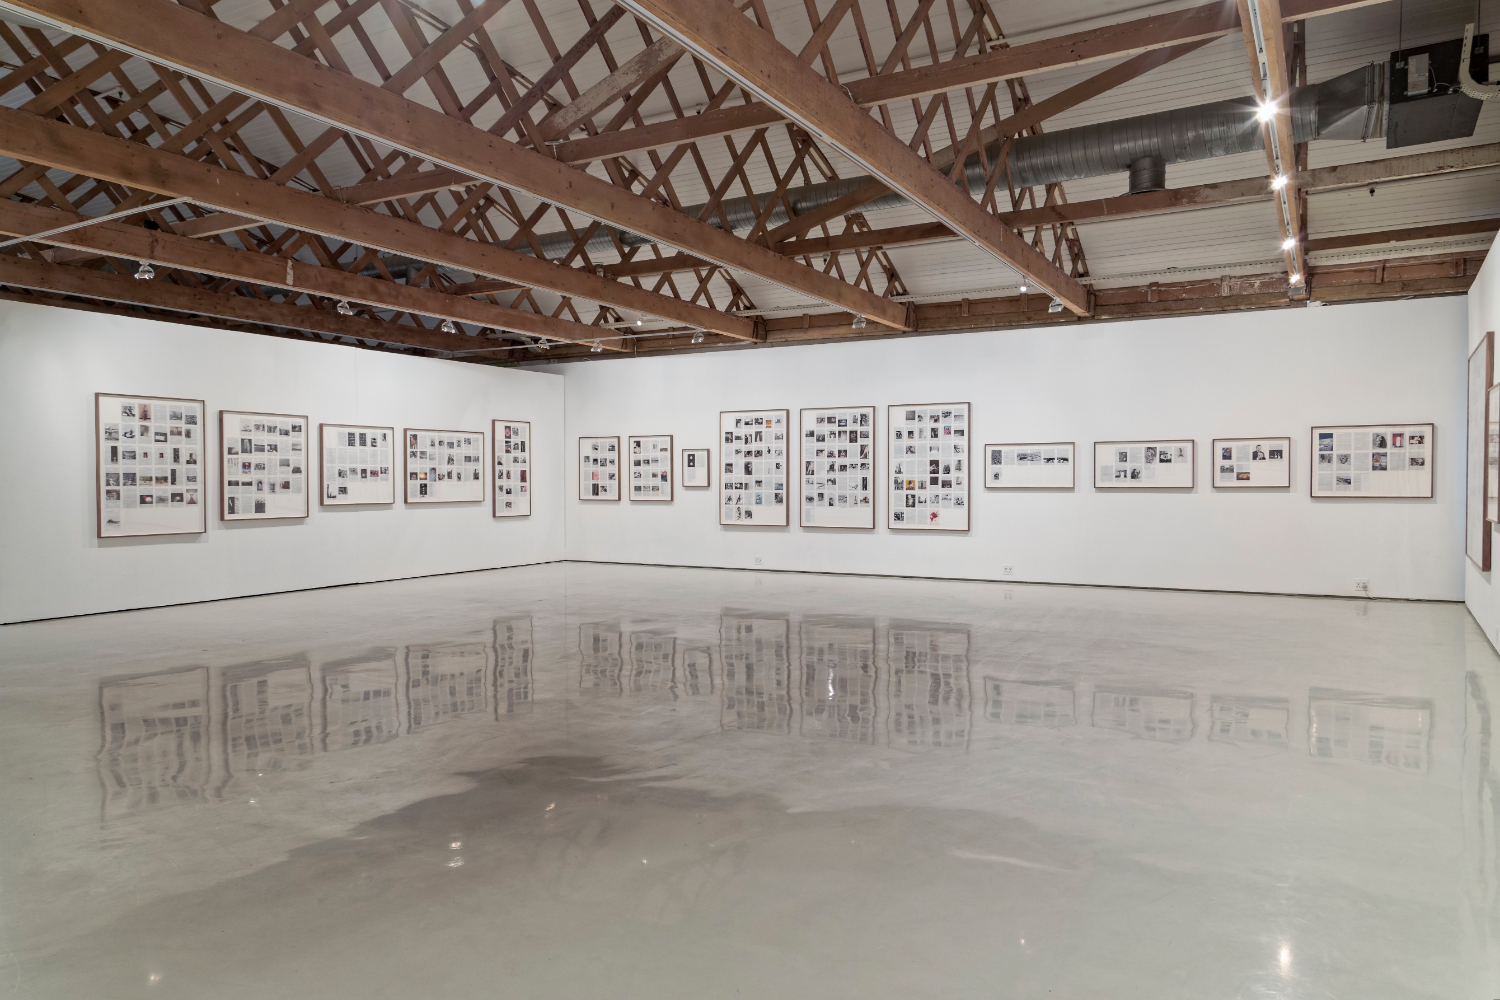  Divine Violence, Goodman Gallery, Cape Town, Installation View, 2015, Image © Goodman Gallery 